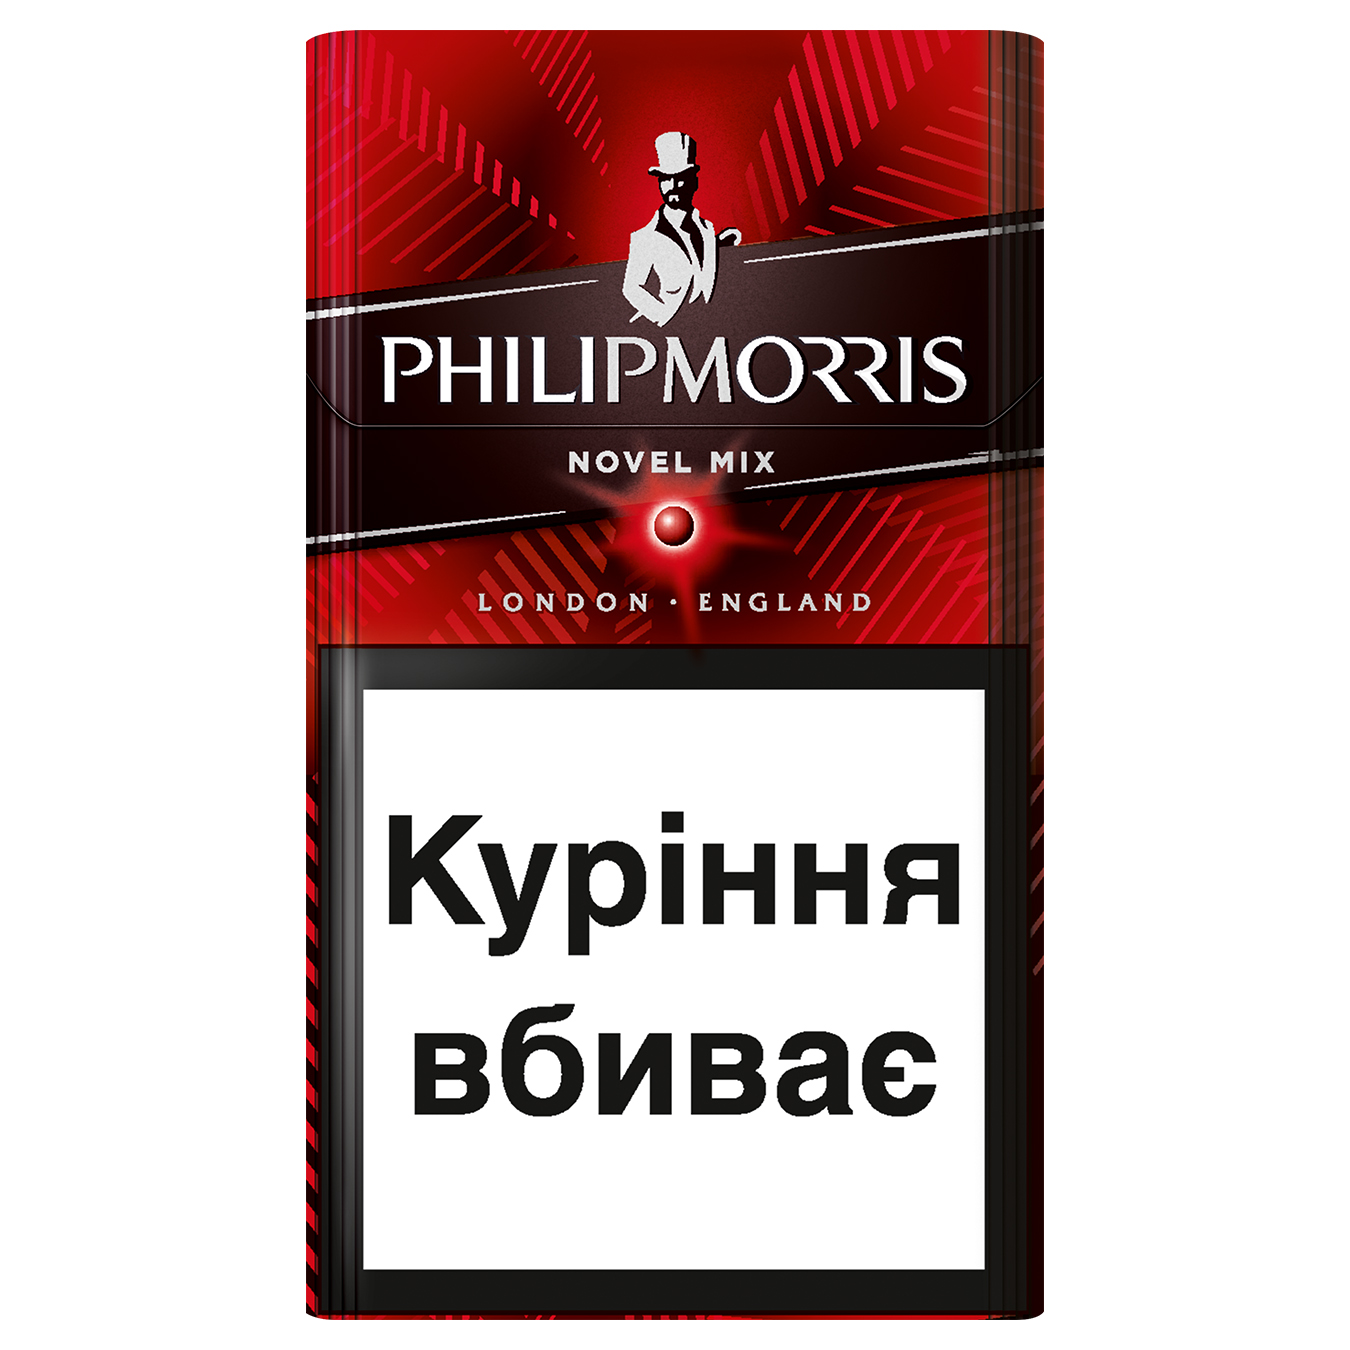 Philip Morris Novel Mix Summer Cigarettes (the price is indicated without excise tax)